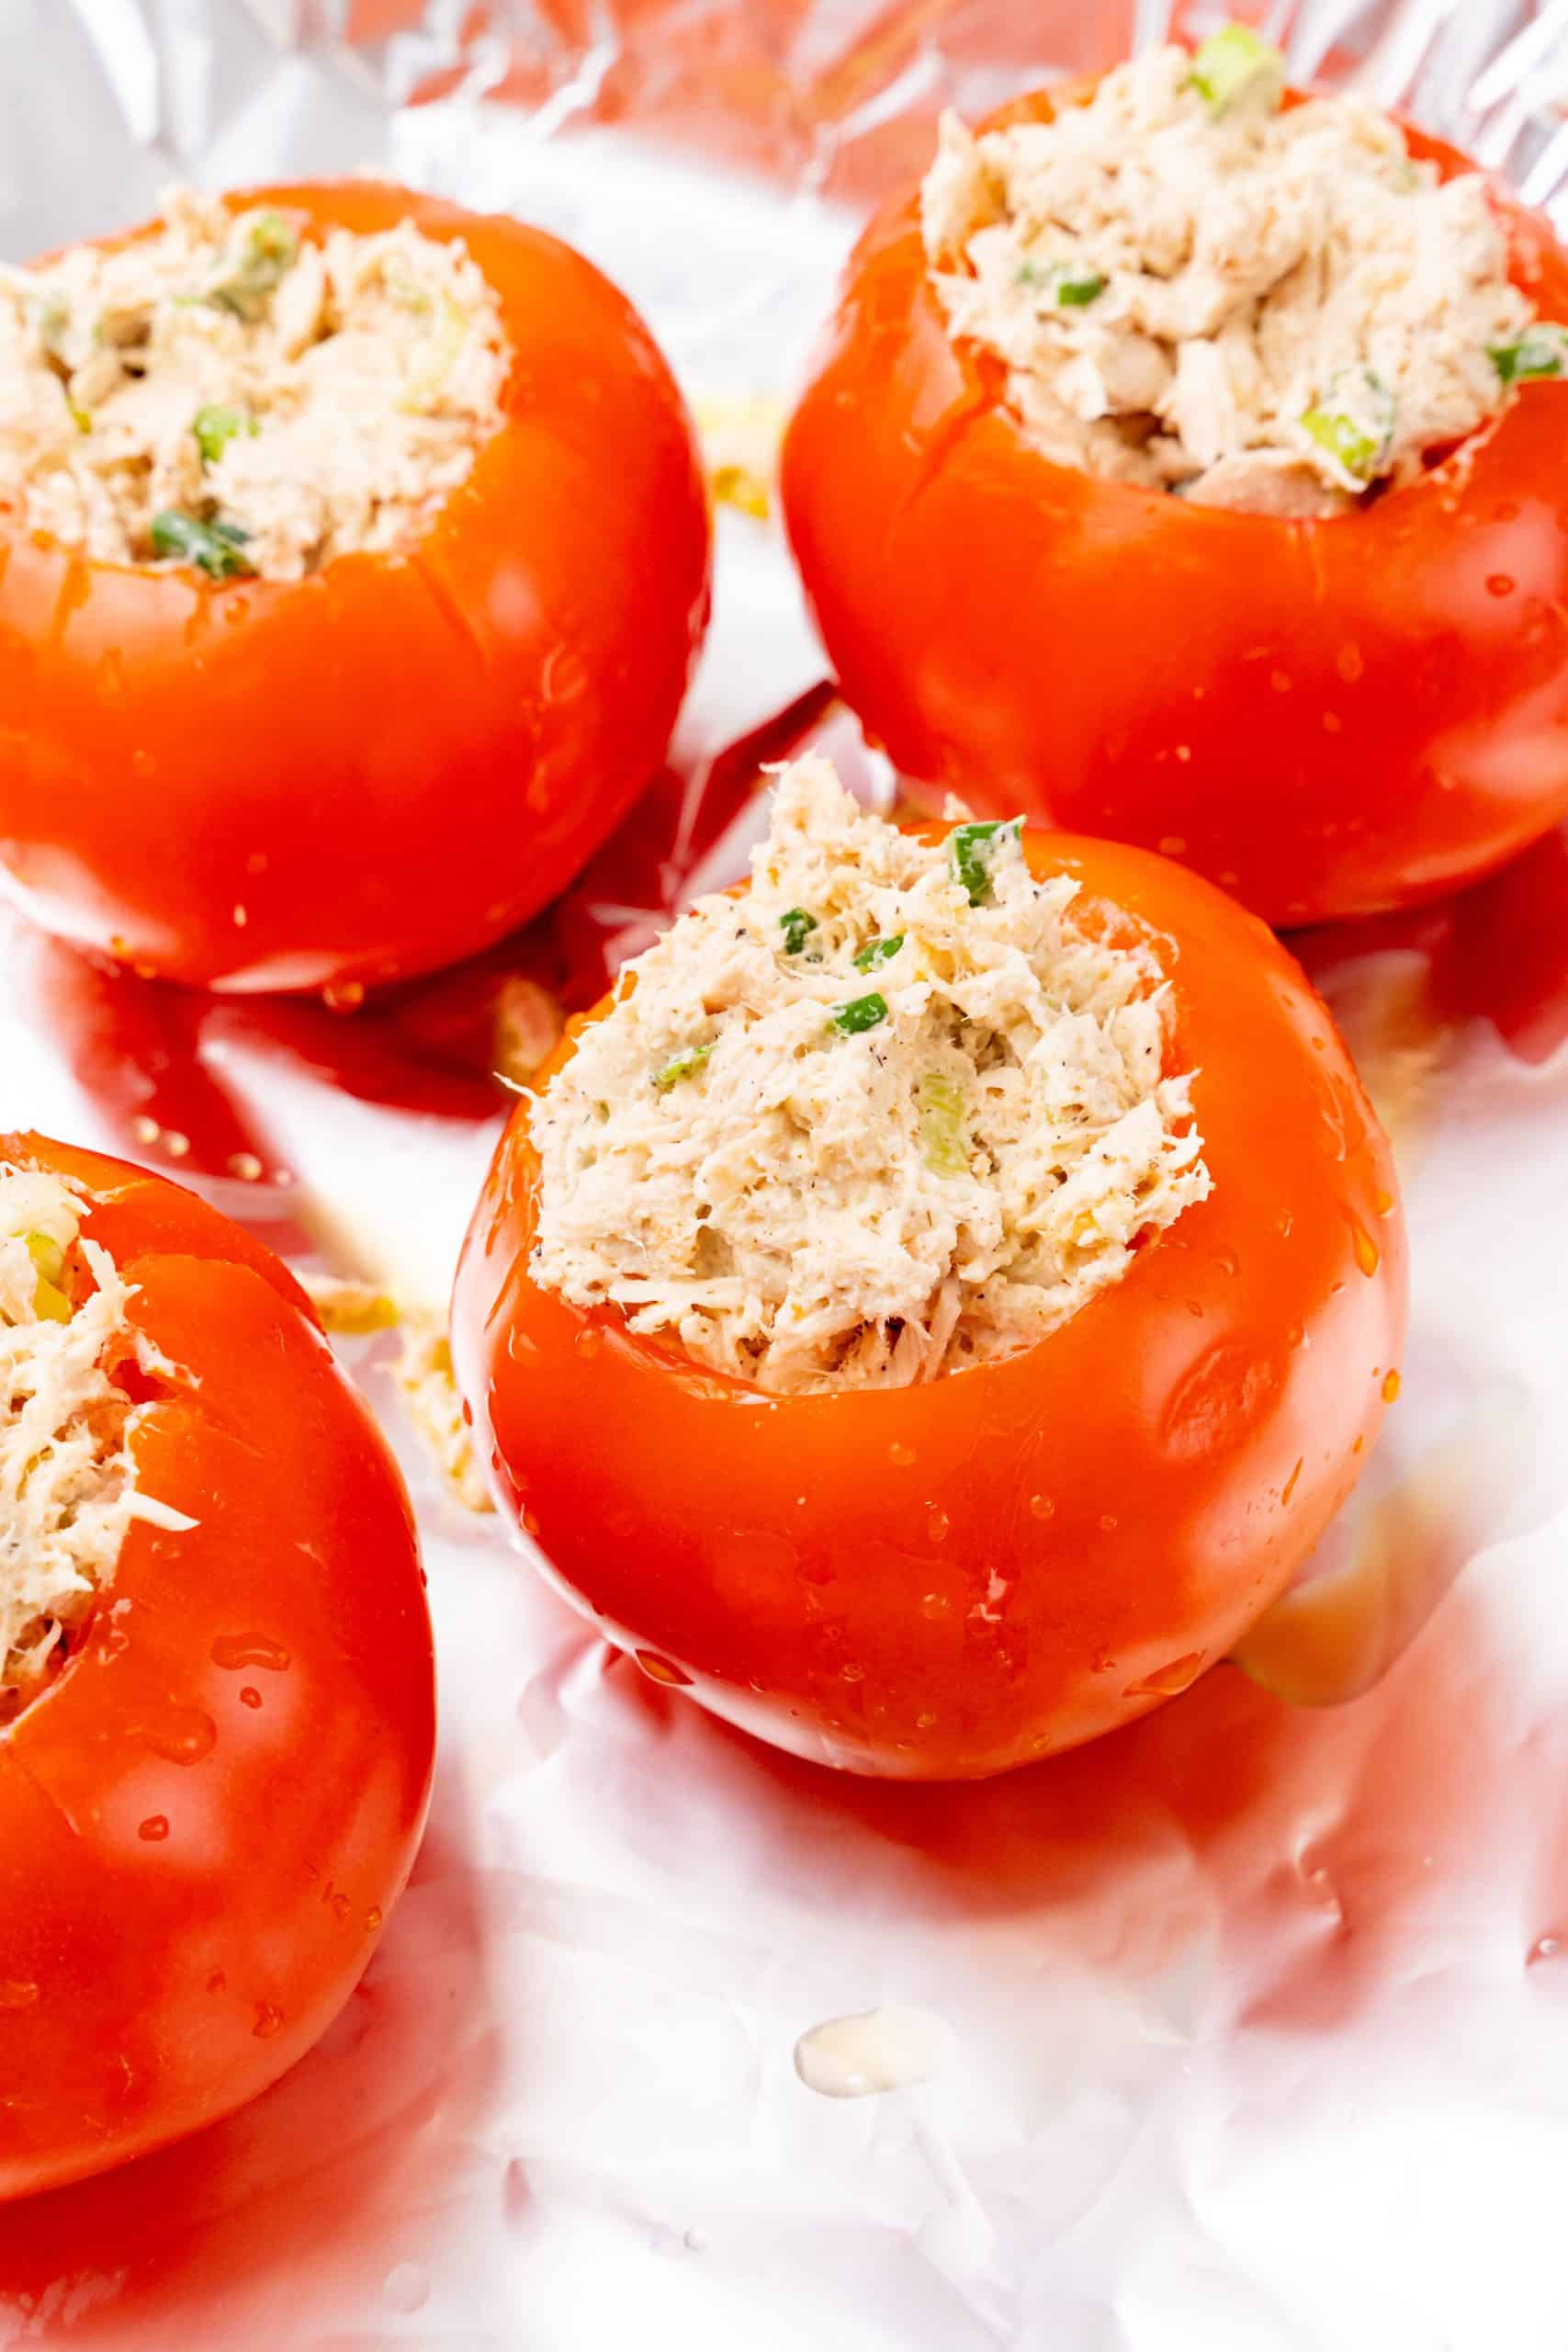 tuna salad stuffed hollowed out tomatoes on a foil lined baking sheet